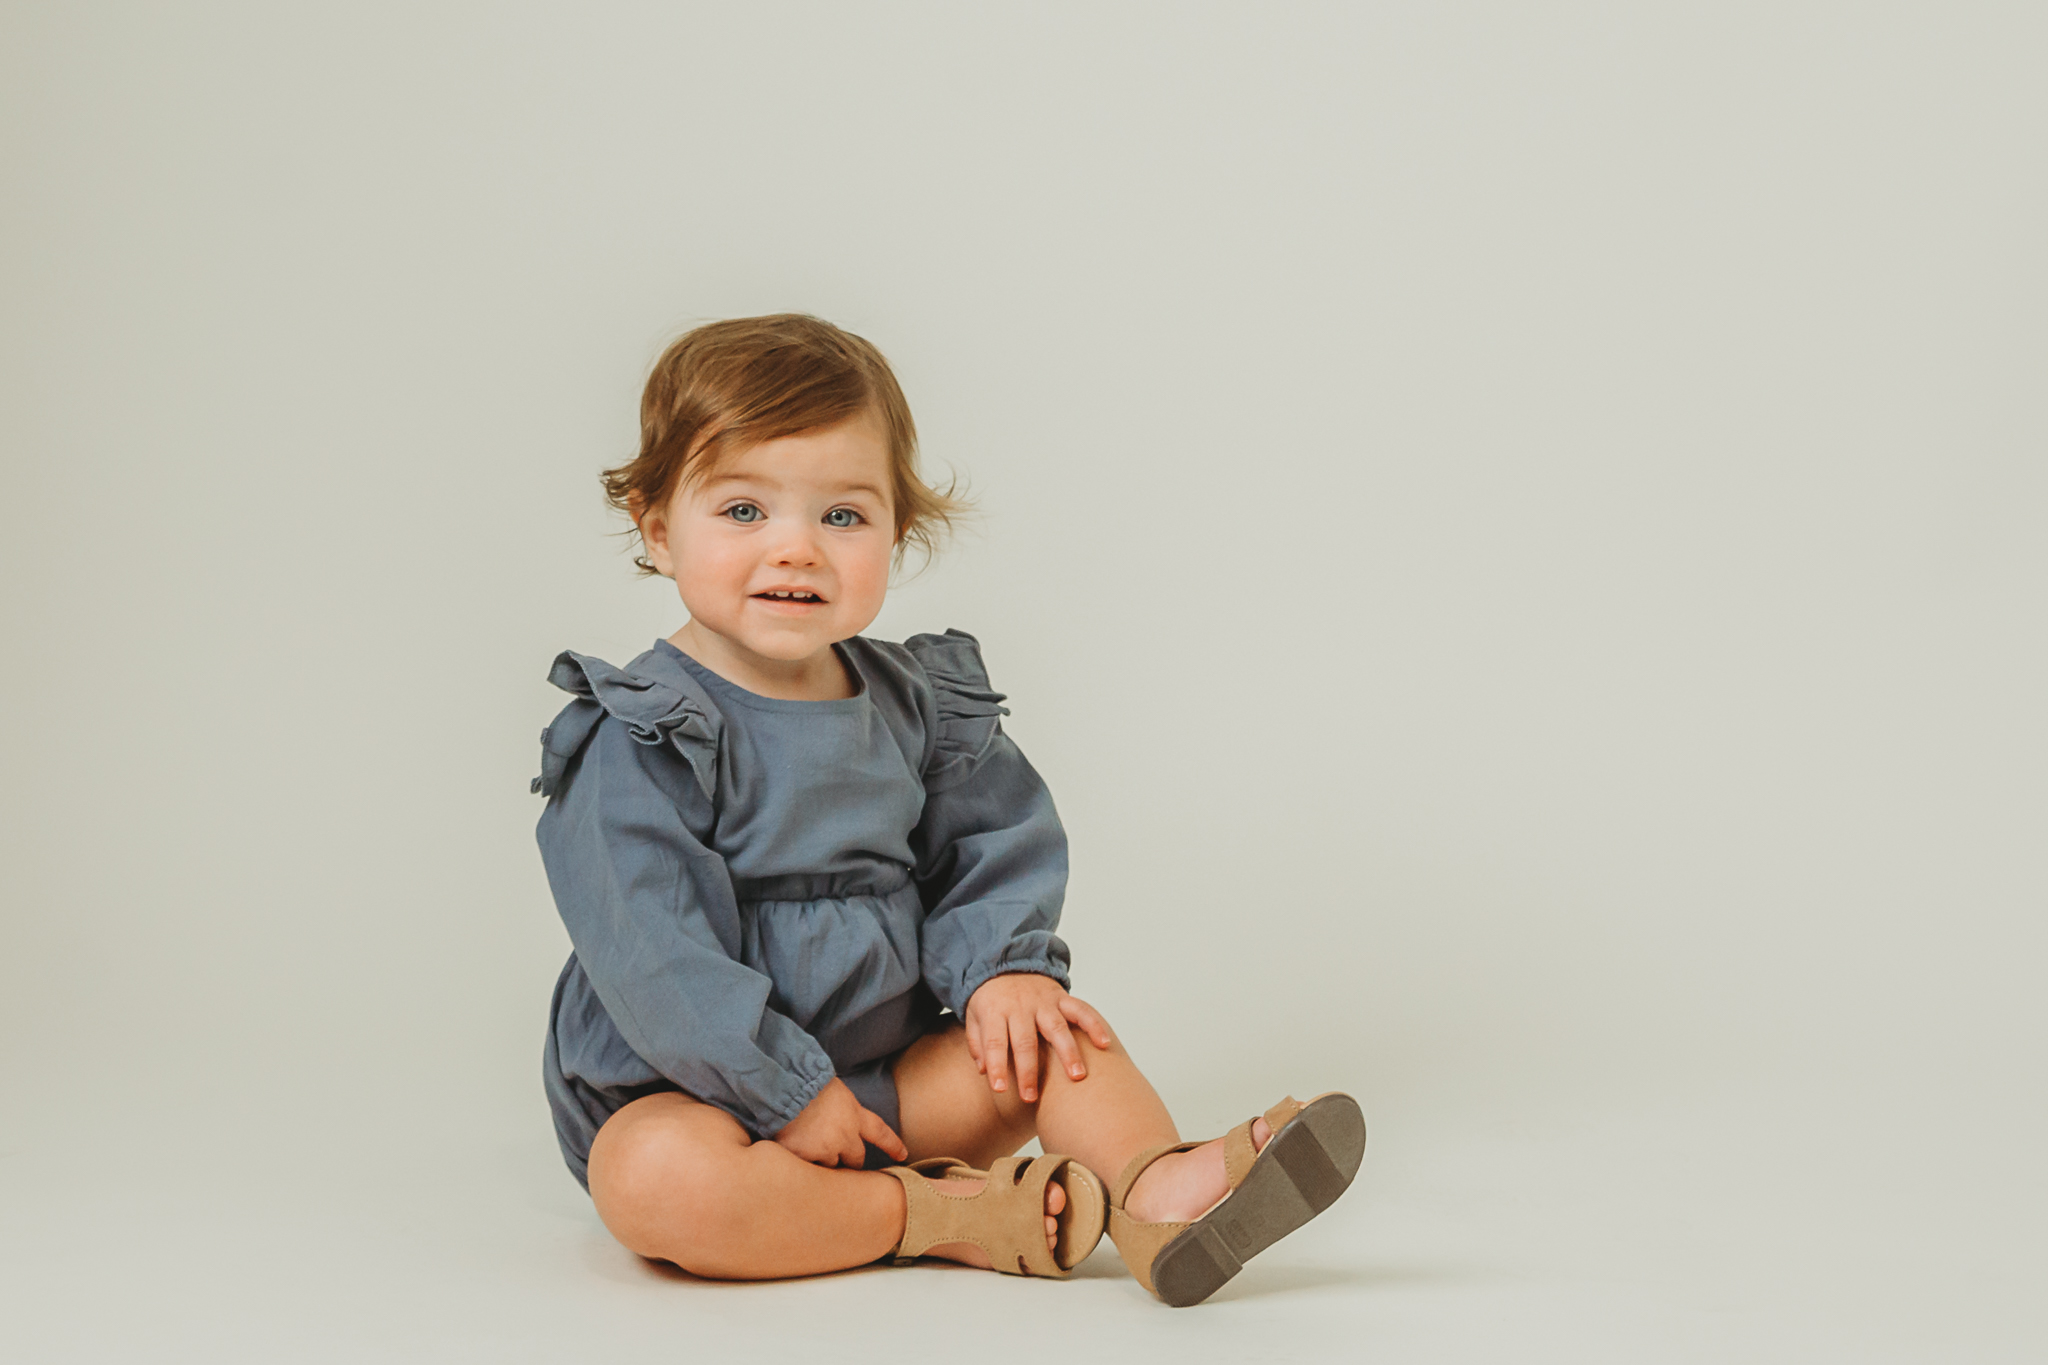 Casi Ann Photography, Photographer, Illinois, IL, Studio, On Location, Milestone, 3 month, 6 month, 9 month, 12 month, 1 year, pictures, portraits, Photography, Ingleside, Lake County, McHenry County, Northern Illinois, Crystal Lake, Round Lake, Volo, Fox Lake, Long Lake, Grayslake, Mundelein, Johnsburg, Lakemoor, Antioch, Gurnee